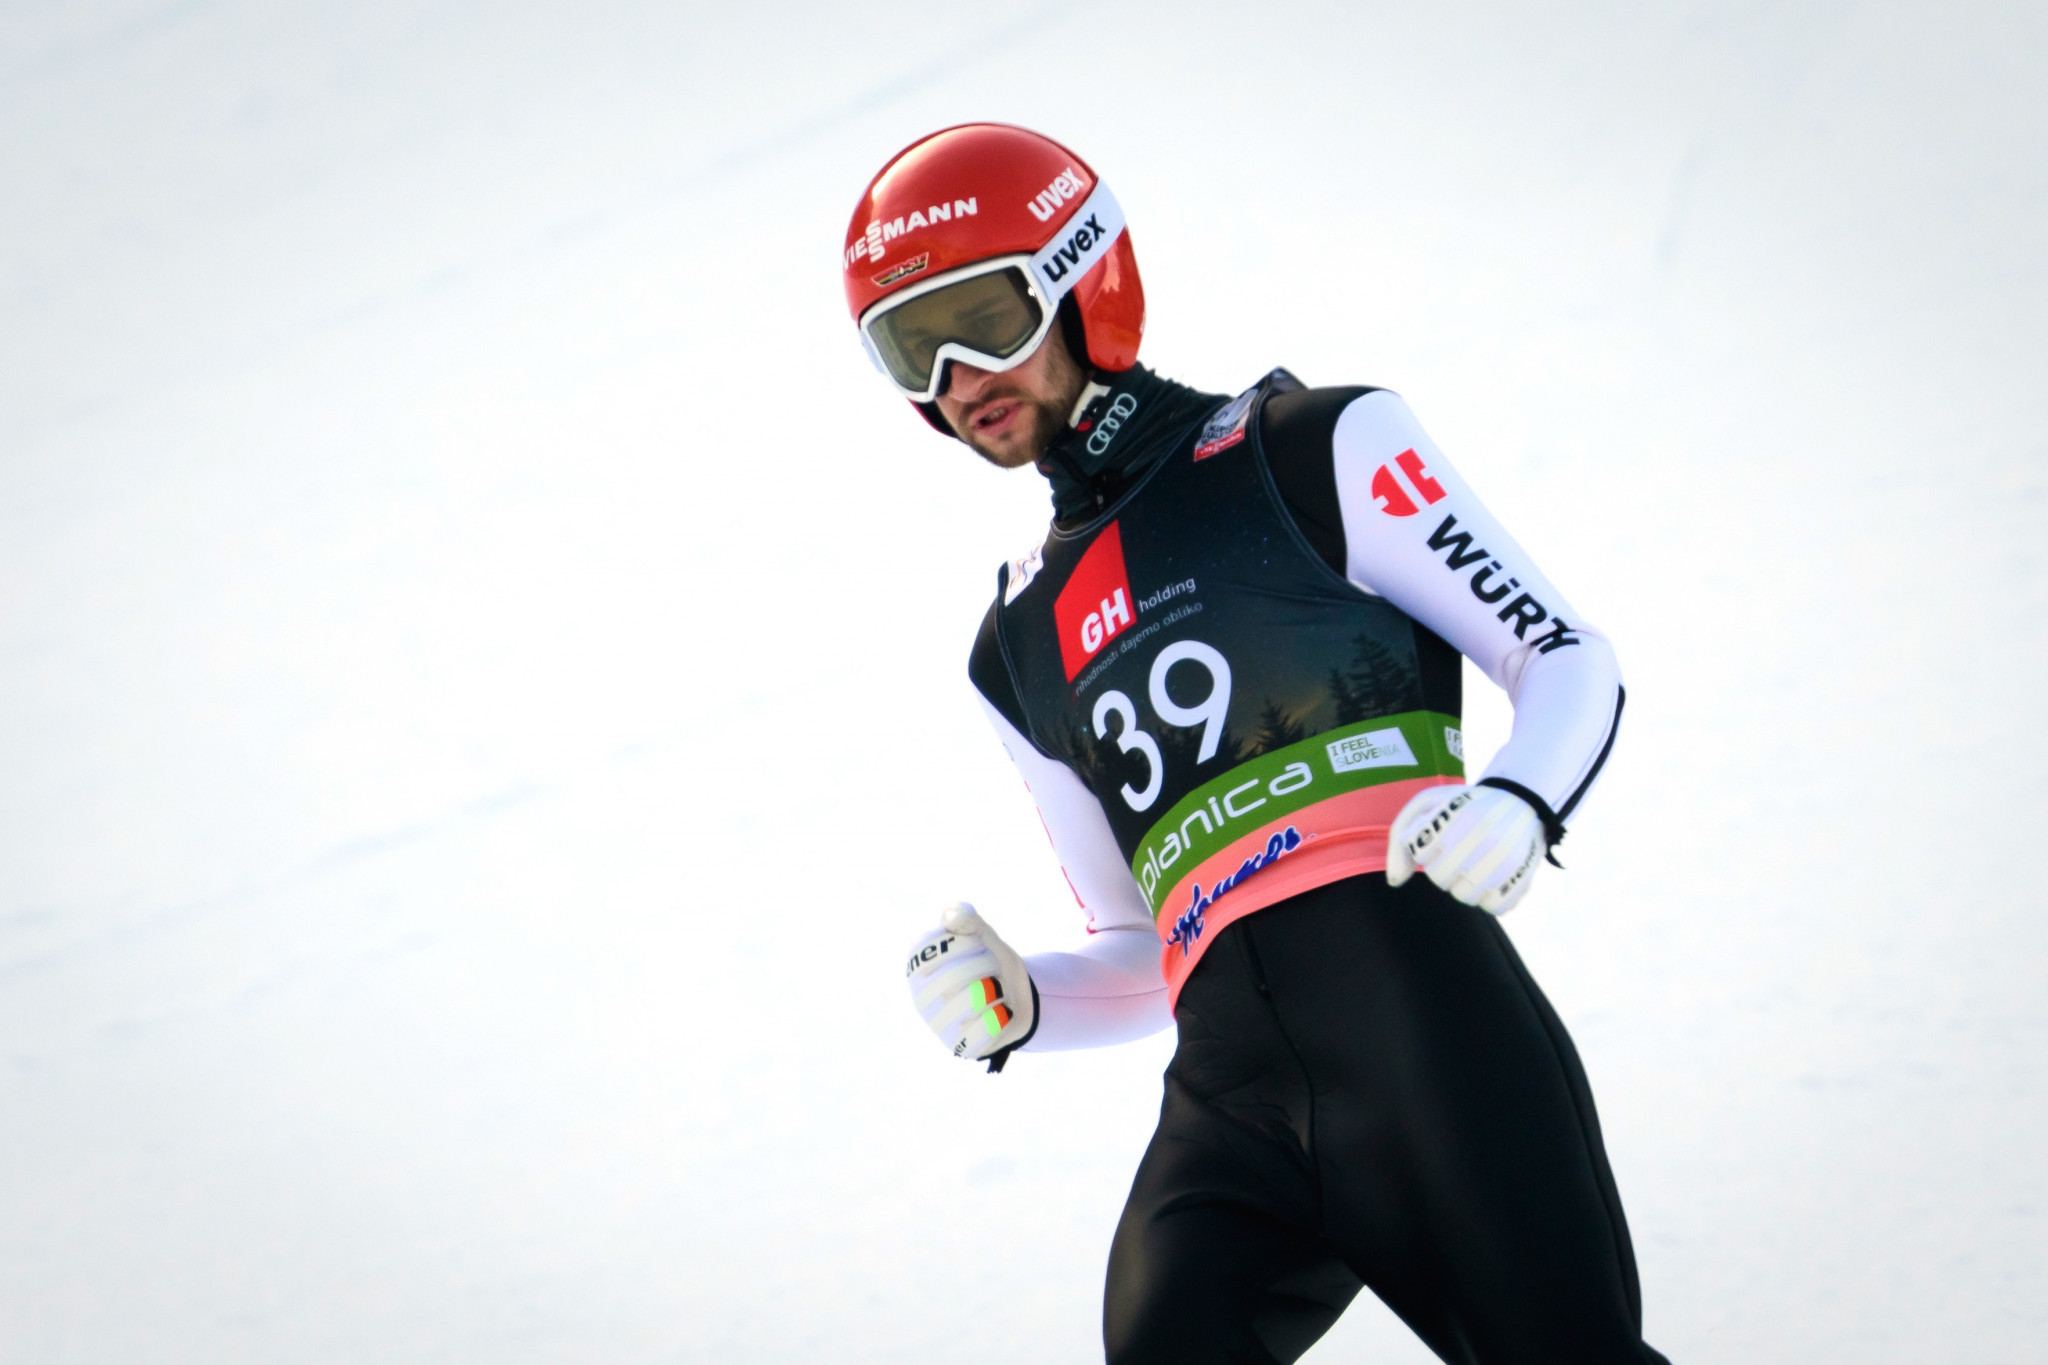 Eisenbichler wins opening event of season-ending Ski Jumping World Cup in Planica